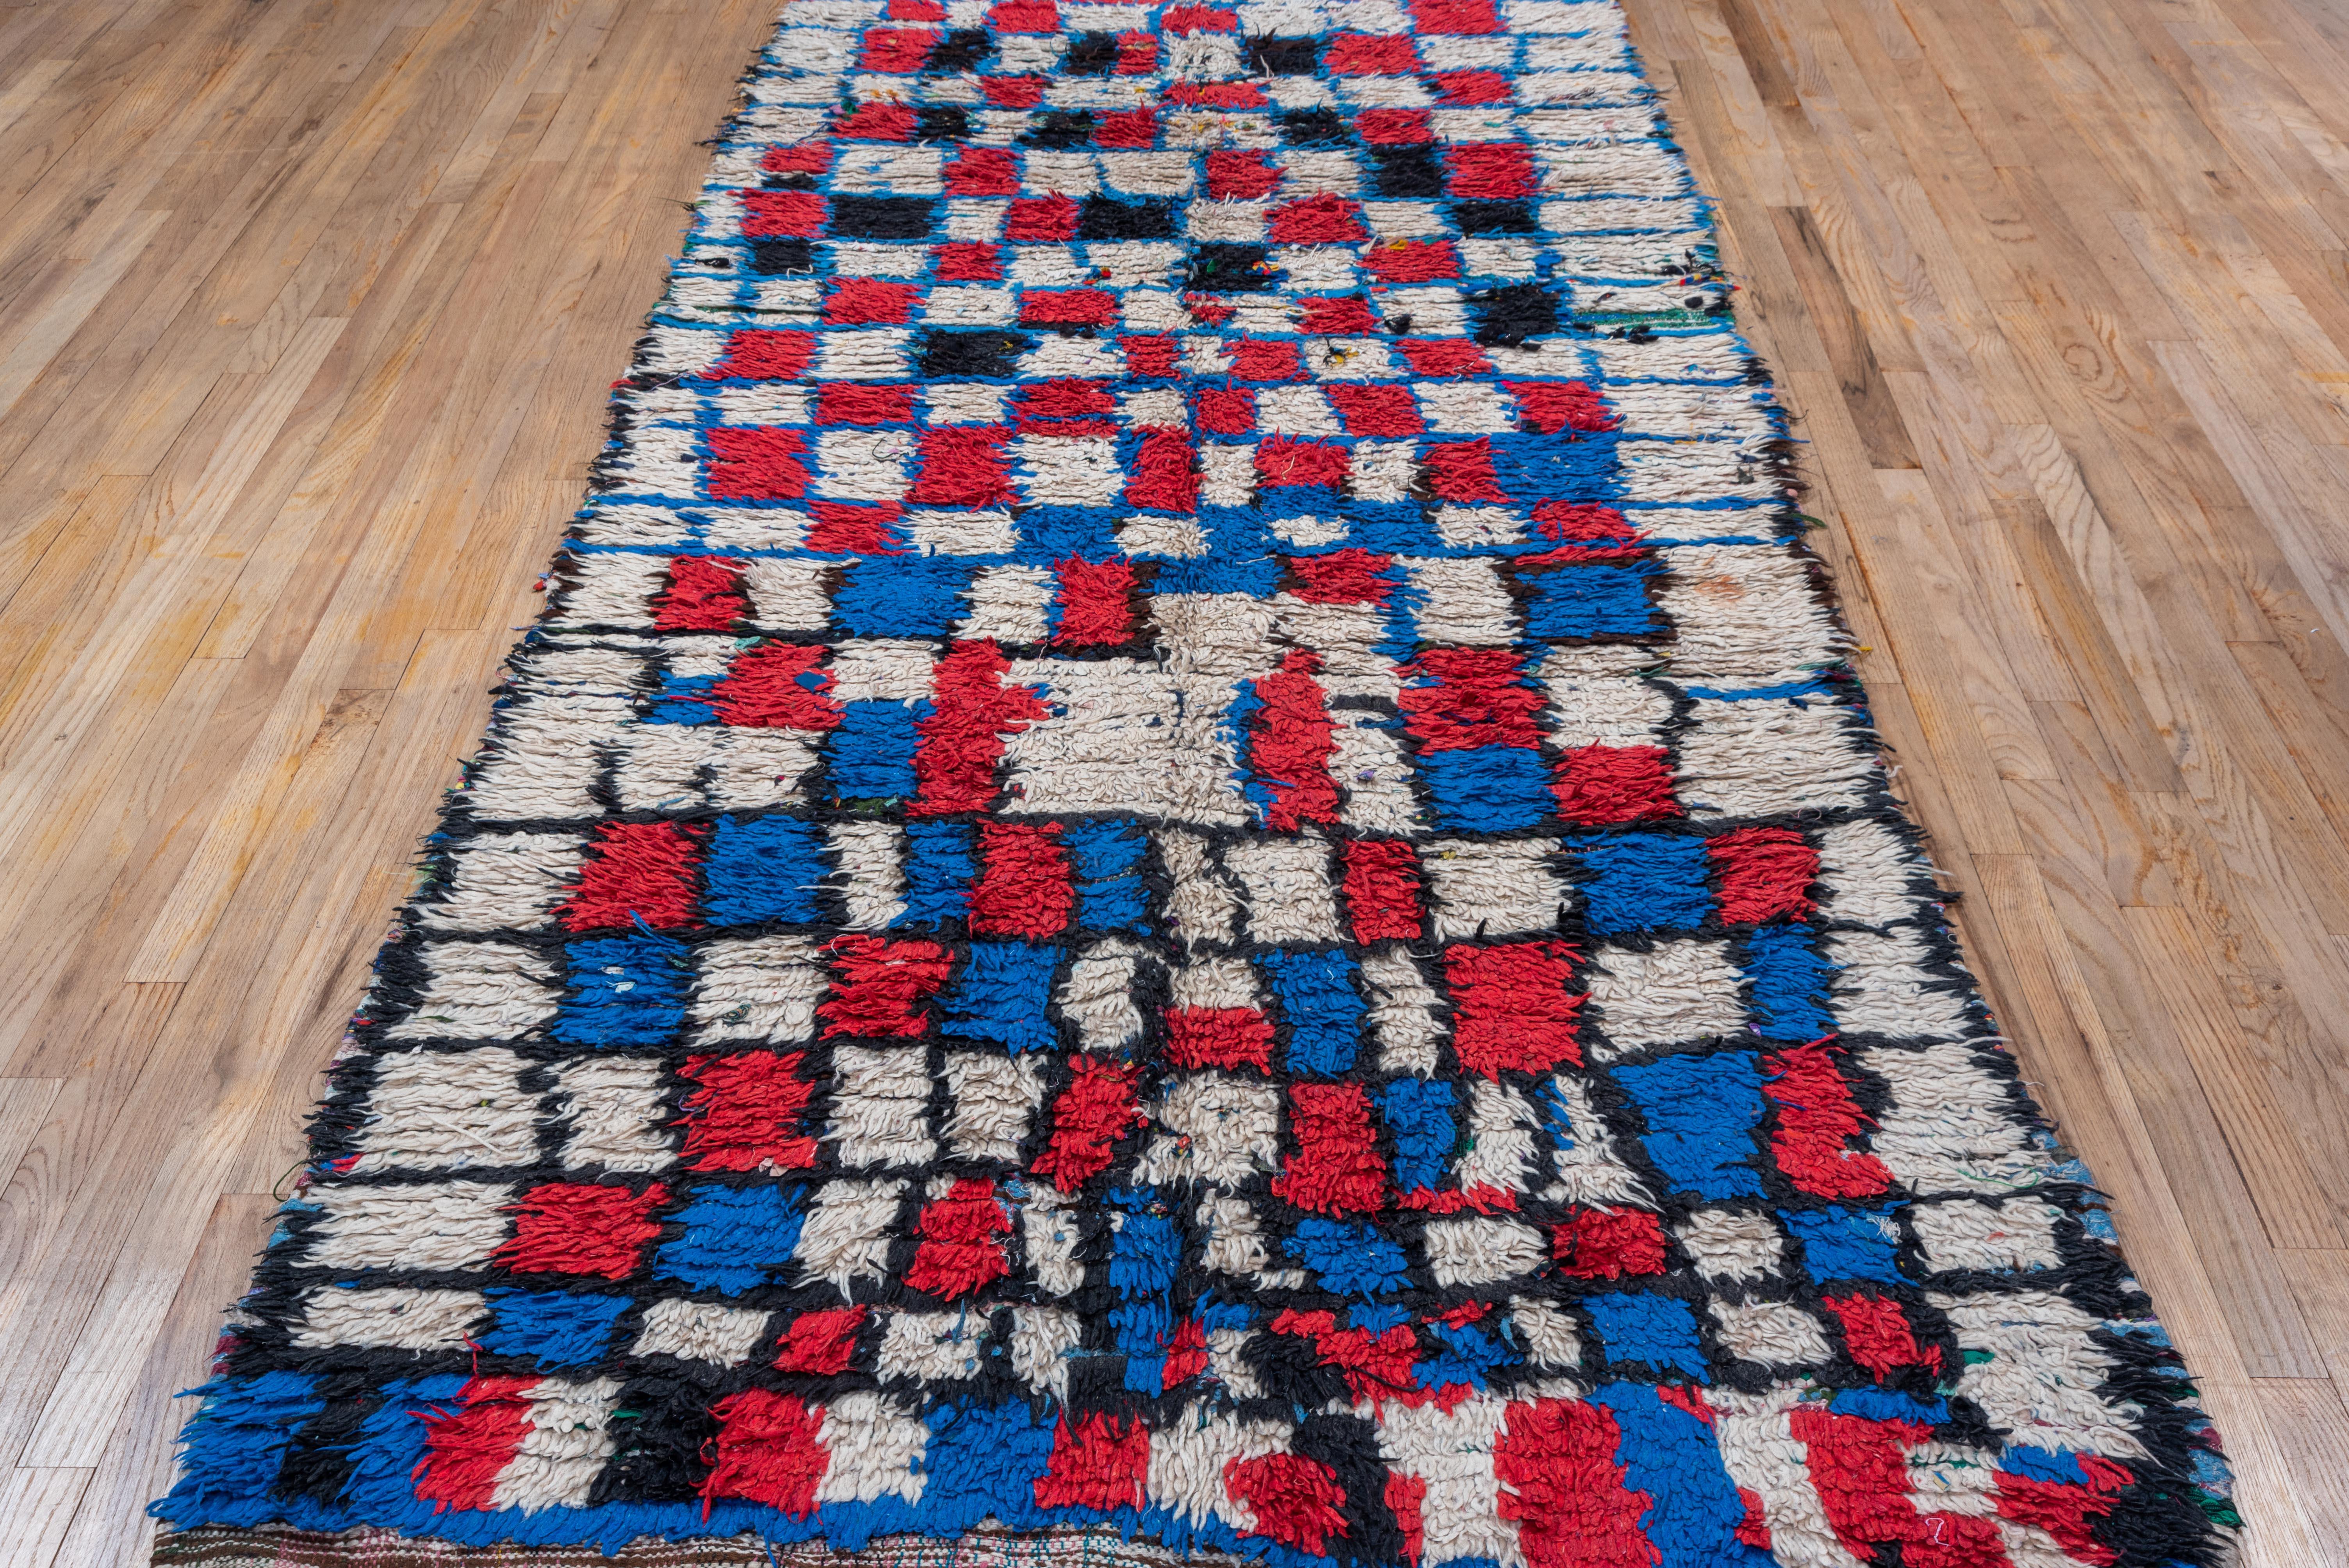 This hand-knotted village rug features a box pattern throughout, shaped with blue threads to create cream and red colored boxes all over. 